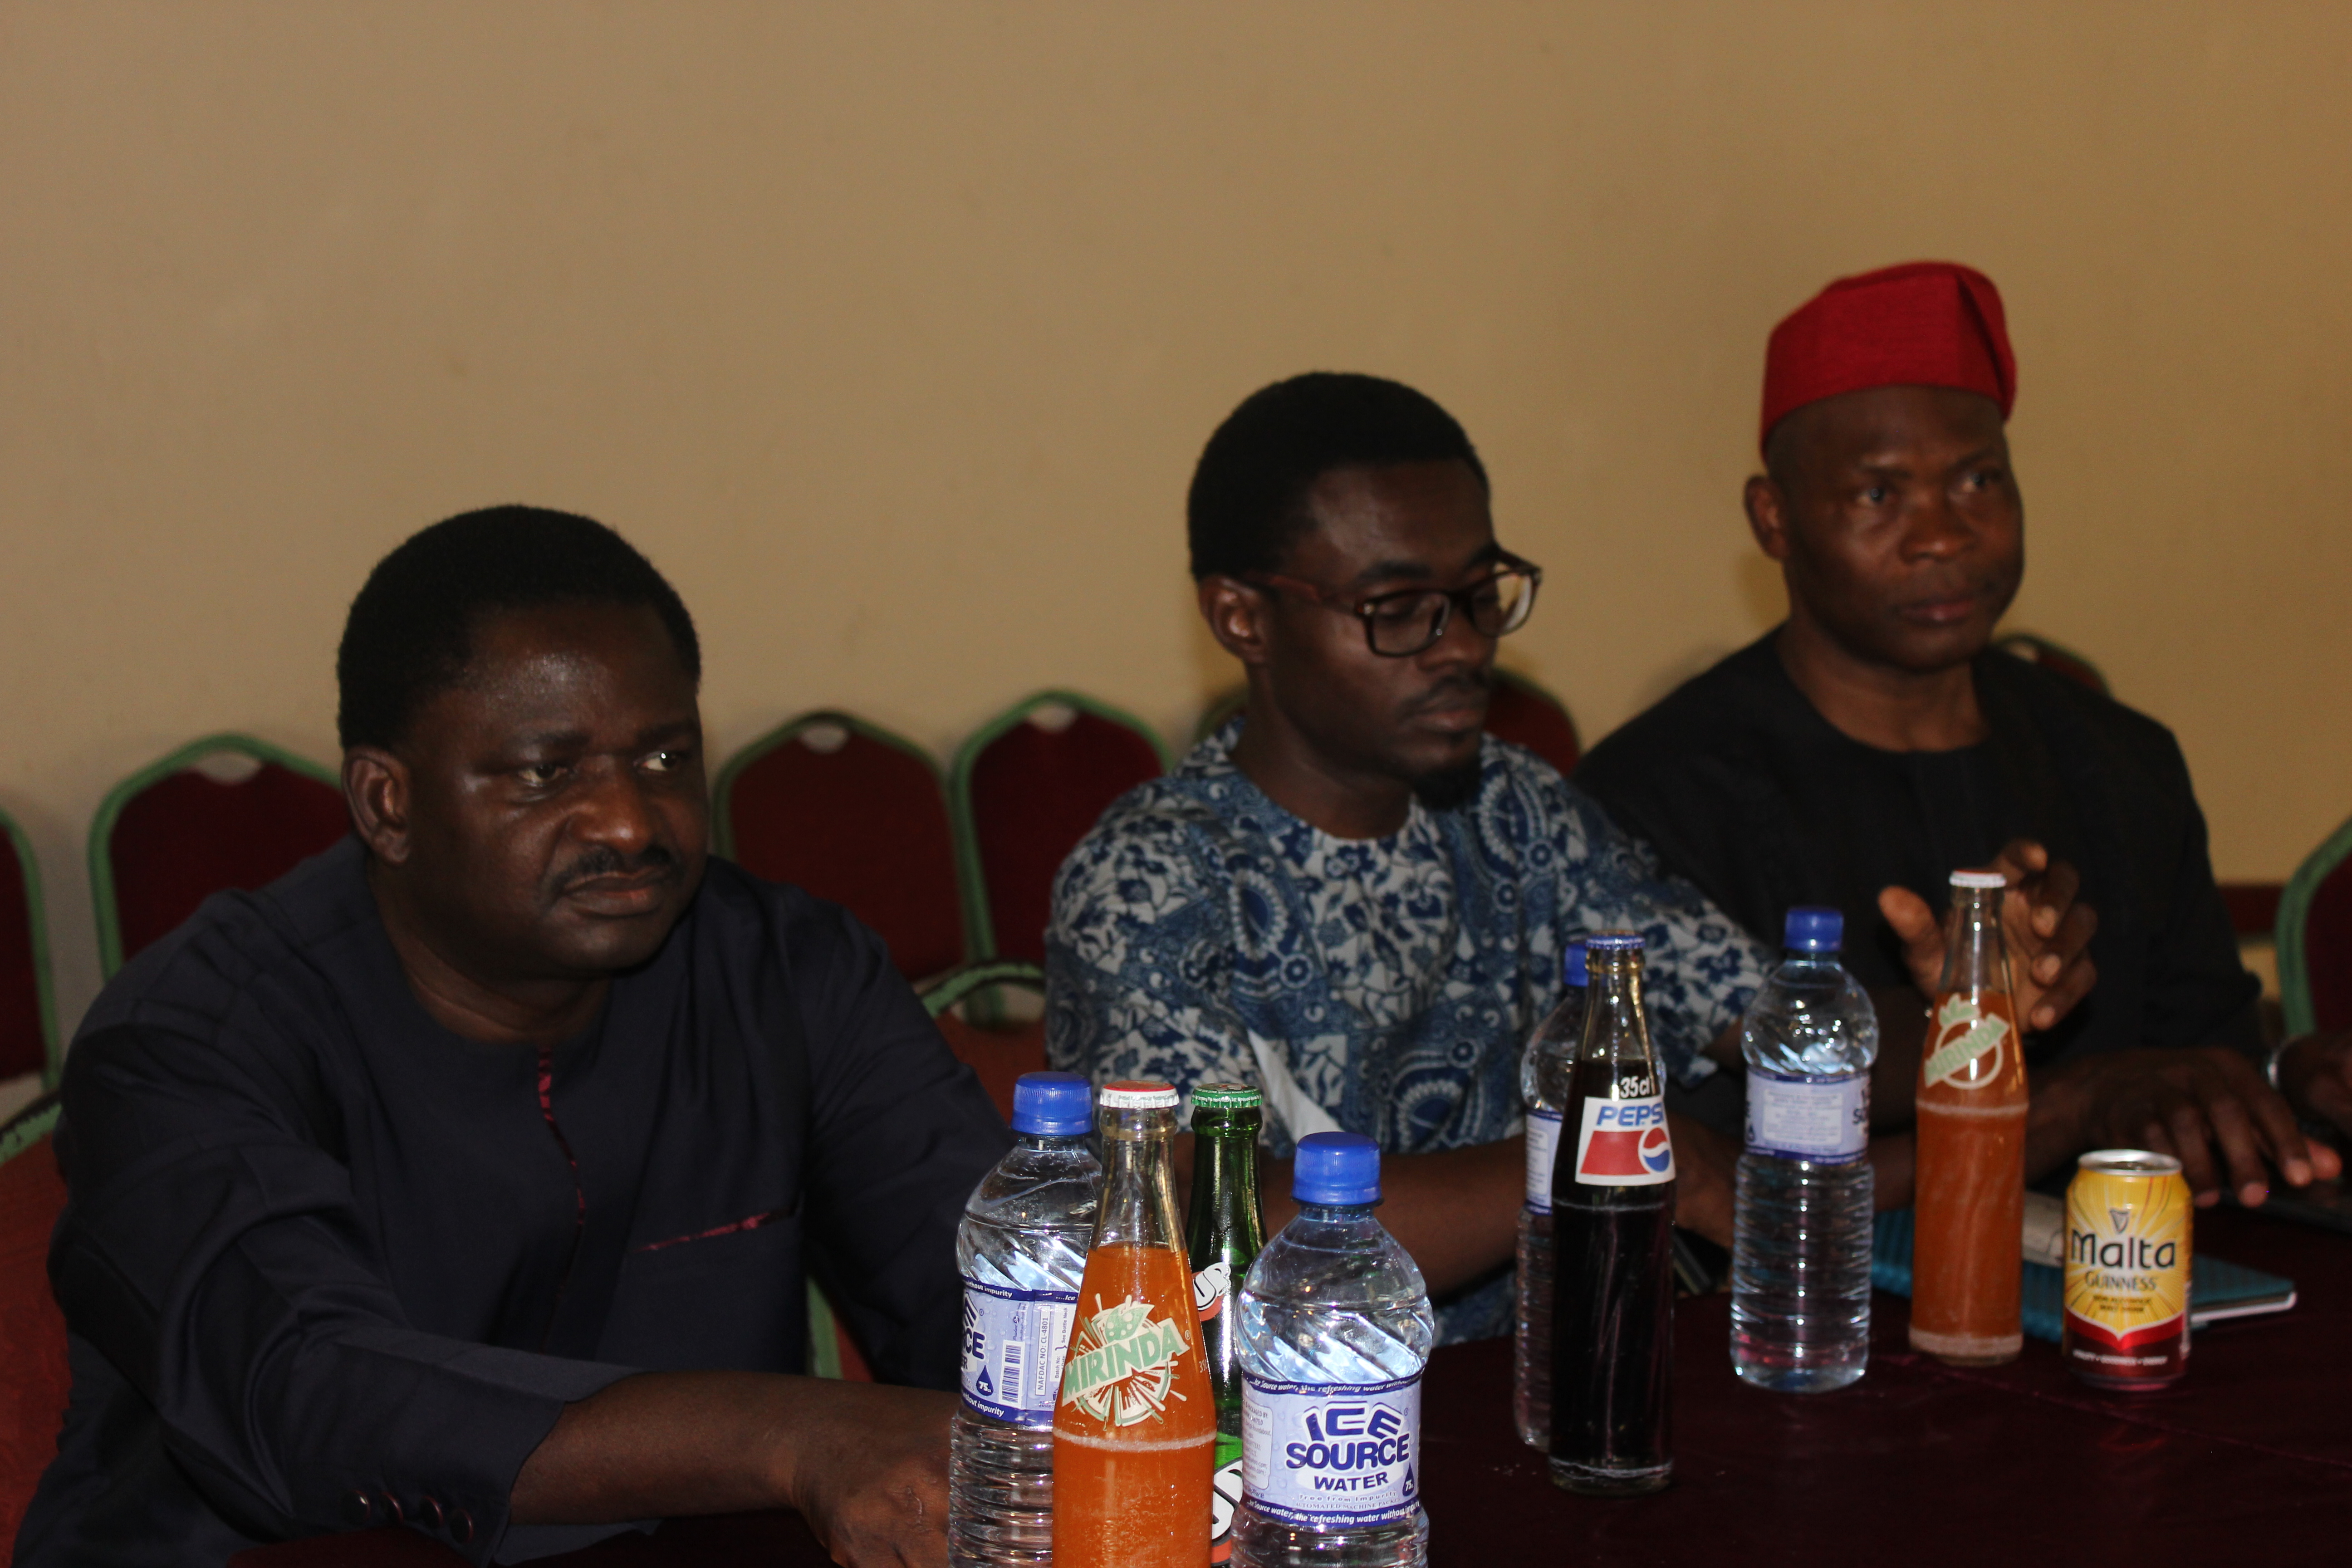 From left - Senior Special Adviser to the President on Media and Publicity, Mr Femi Adesina... He graced the Seminar as a Special Guest of Honour! Also on the high table is the CEO, Corporate Farmers, Mr Akin Alabi as well as Chairman of the occasion, Prince Wale Oyekoya, CEO Bama Foods!